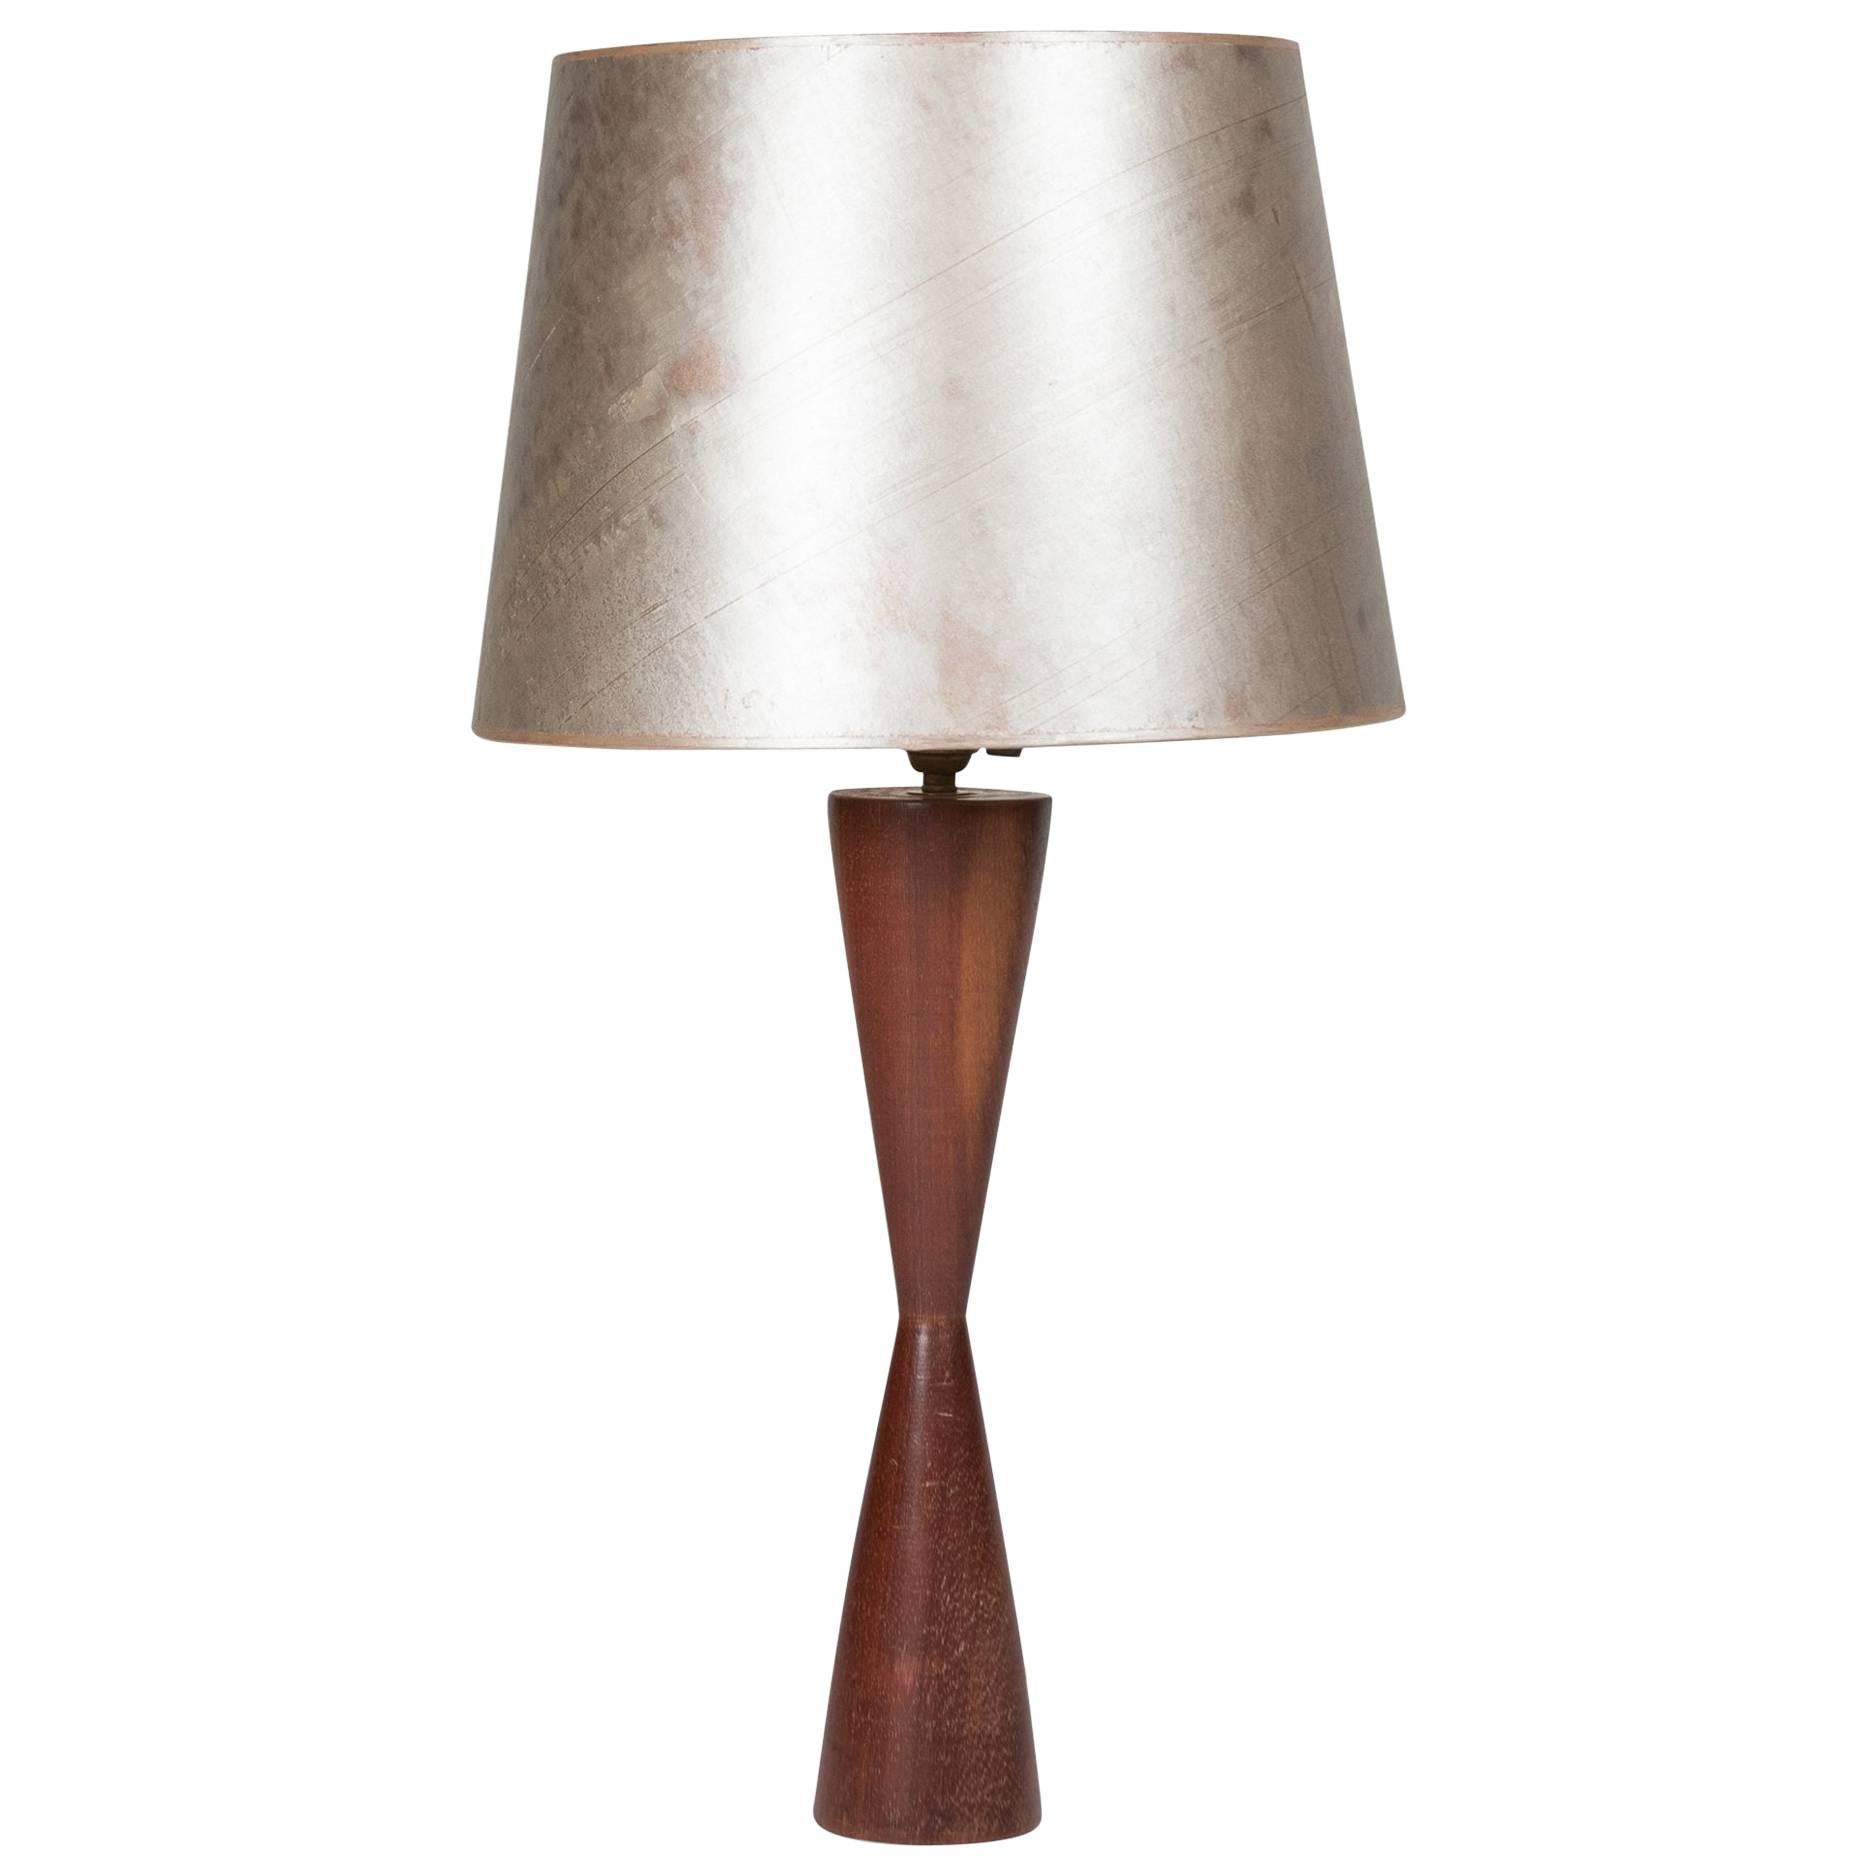 Turned Walnut Table Lamp, Danish, 1950s For Sale